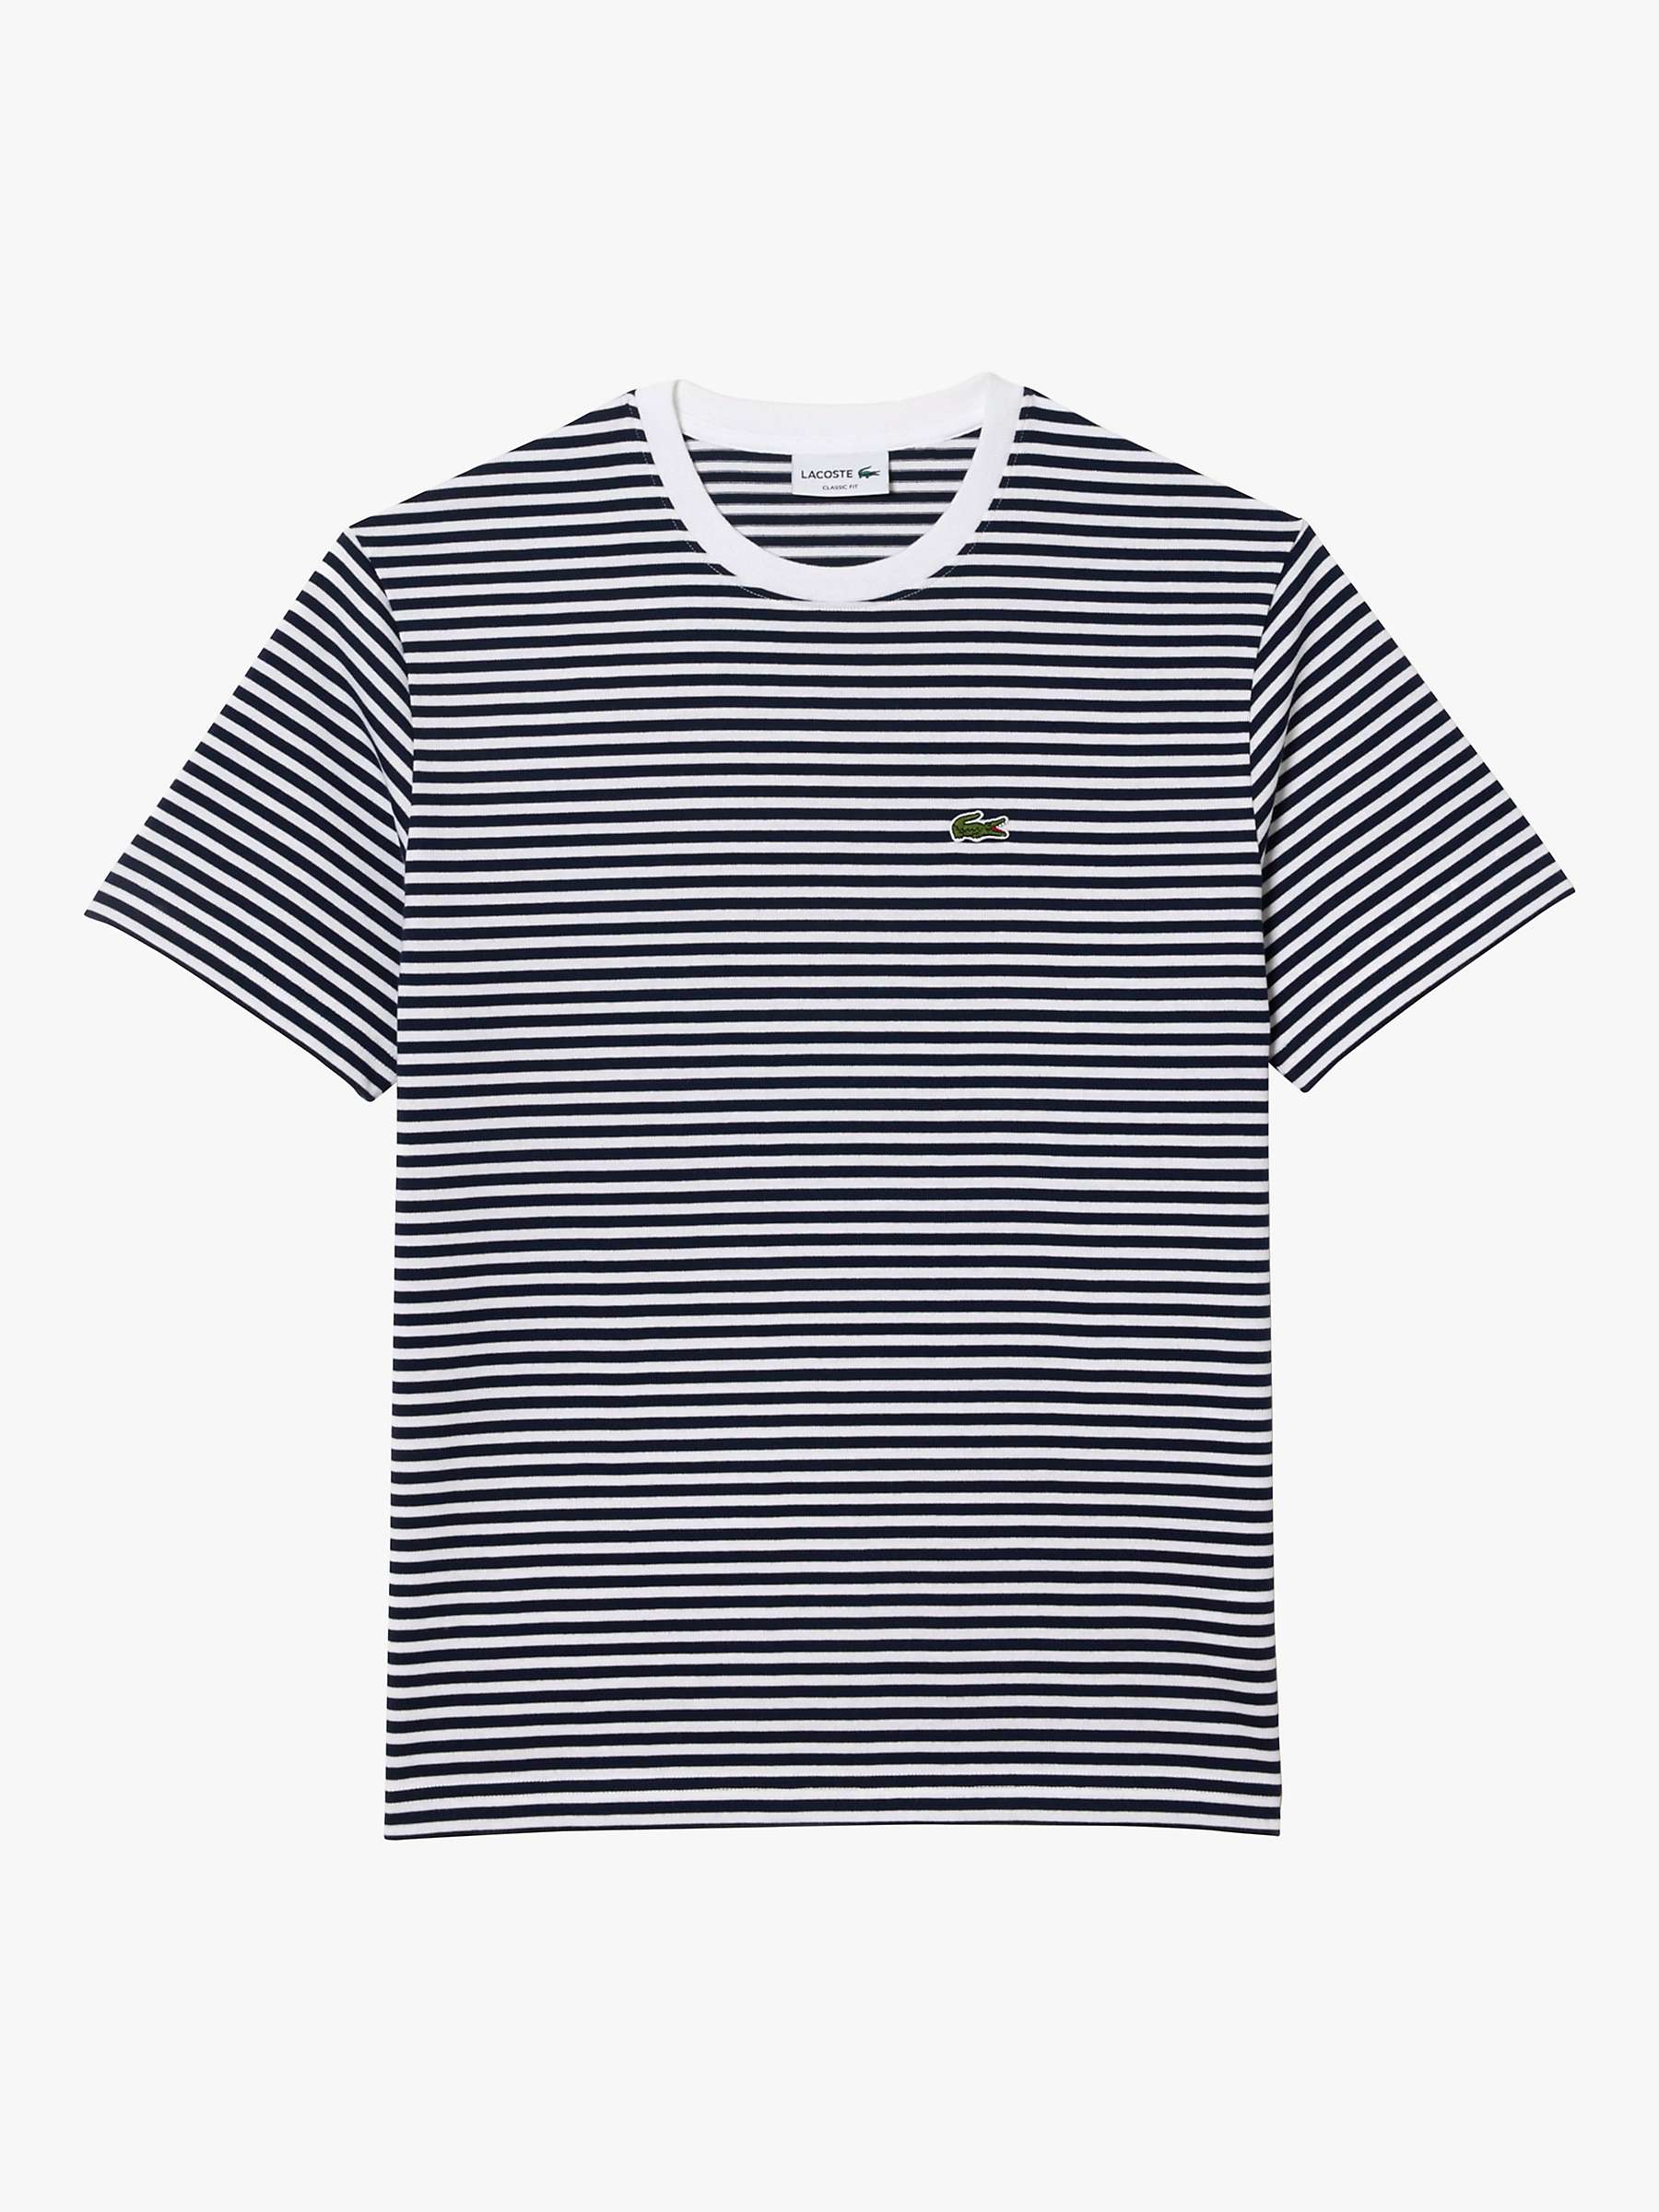 Buy Lacoste Core Essential T-Shirt, White/Navy Online at johnlewis.com